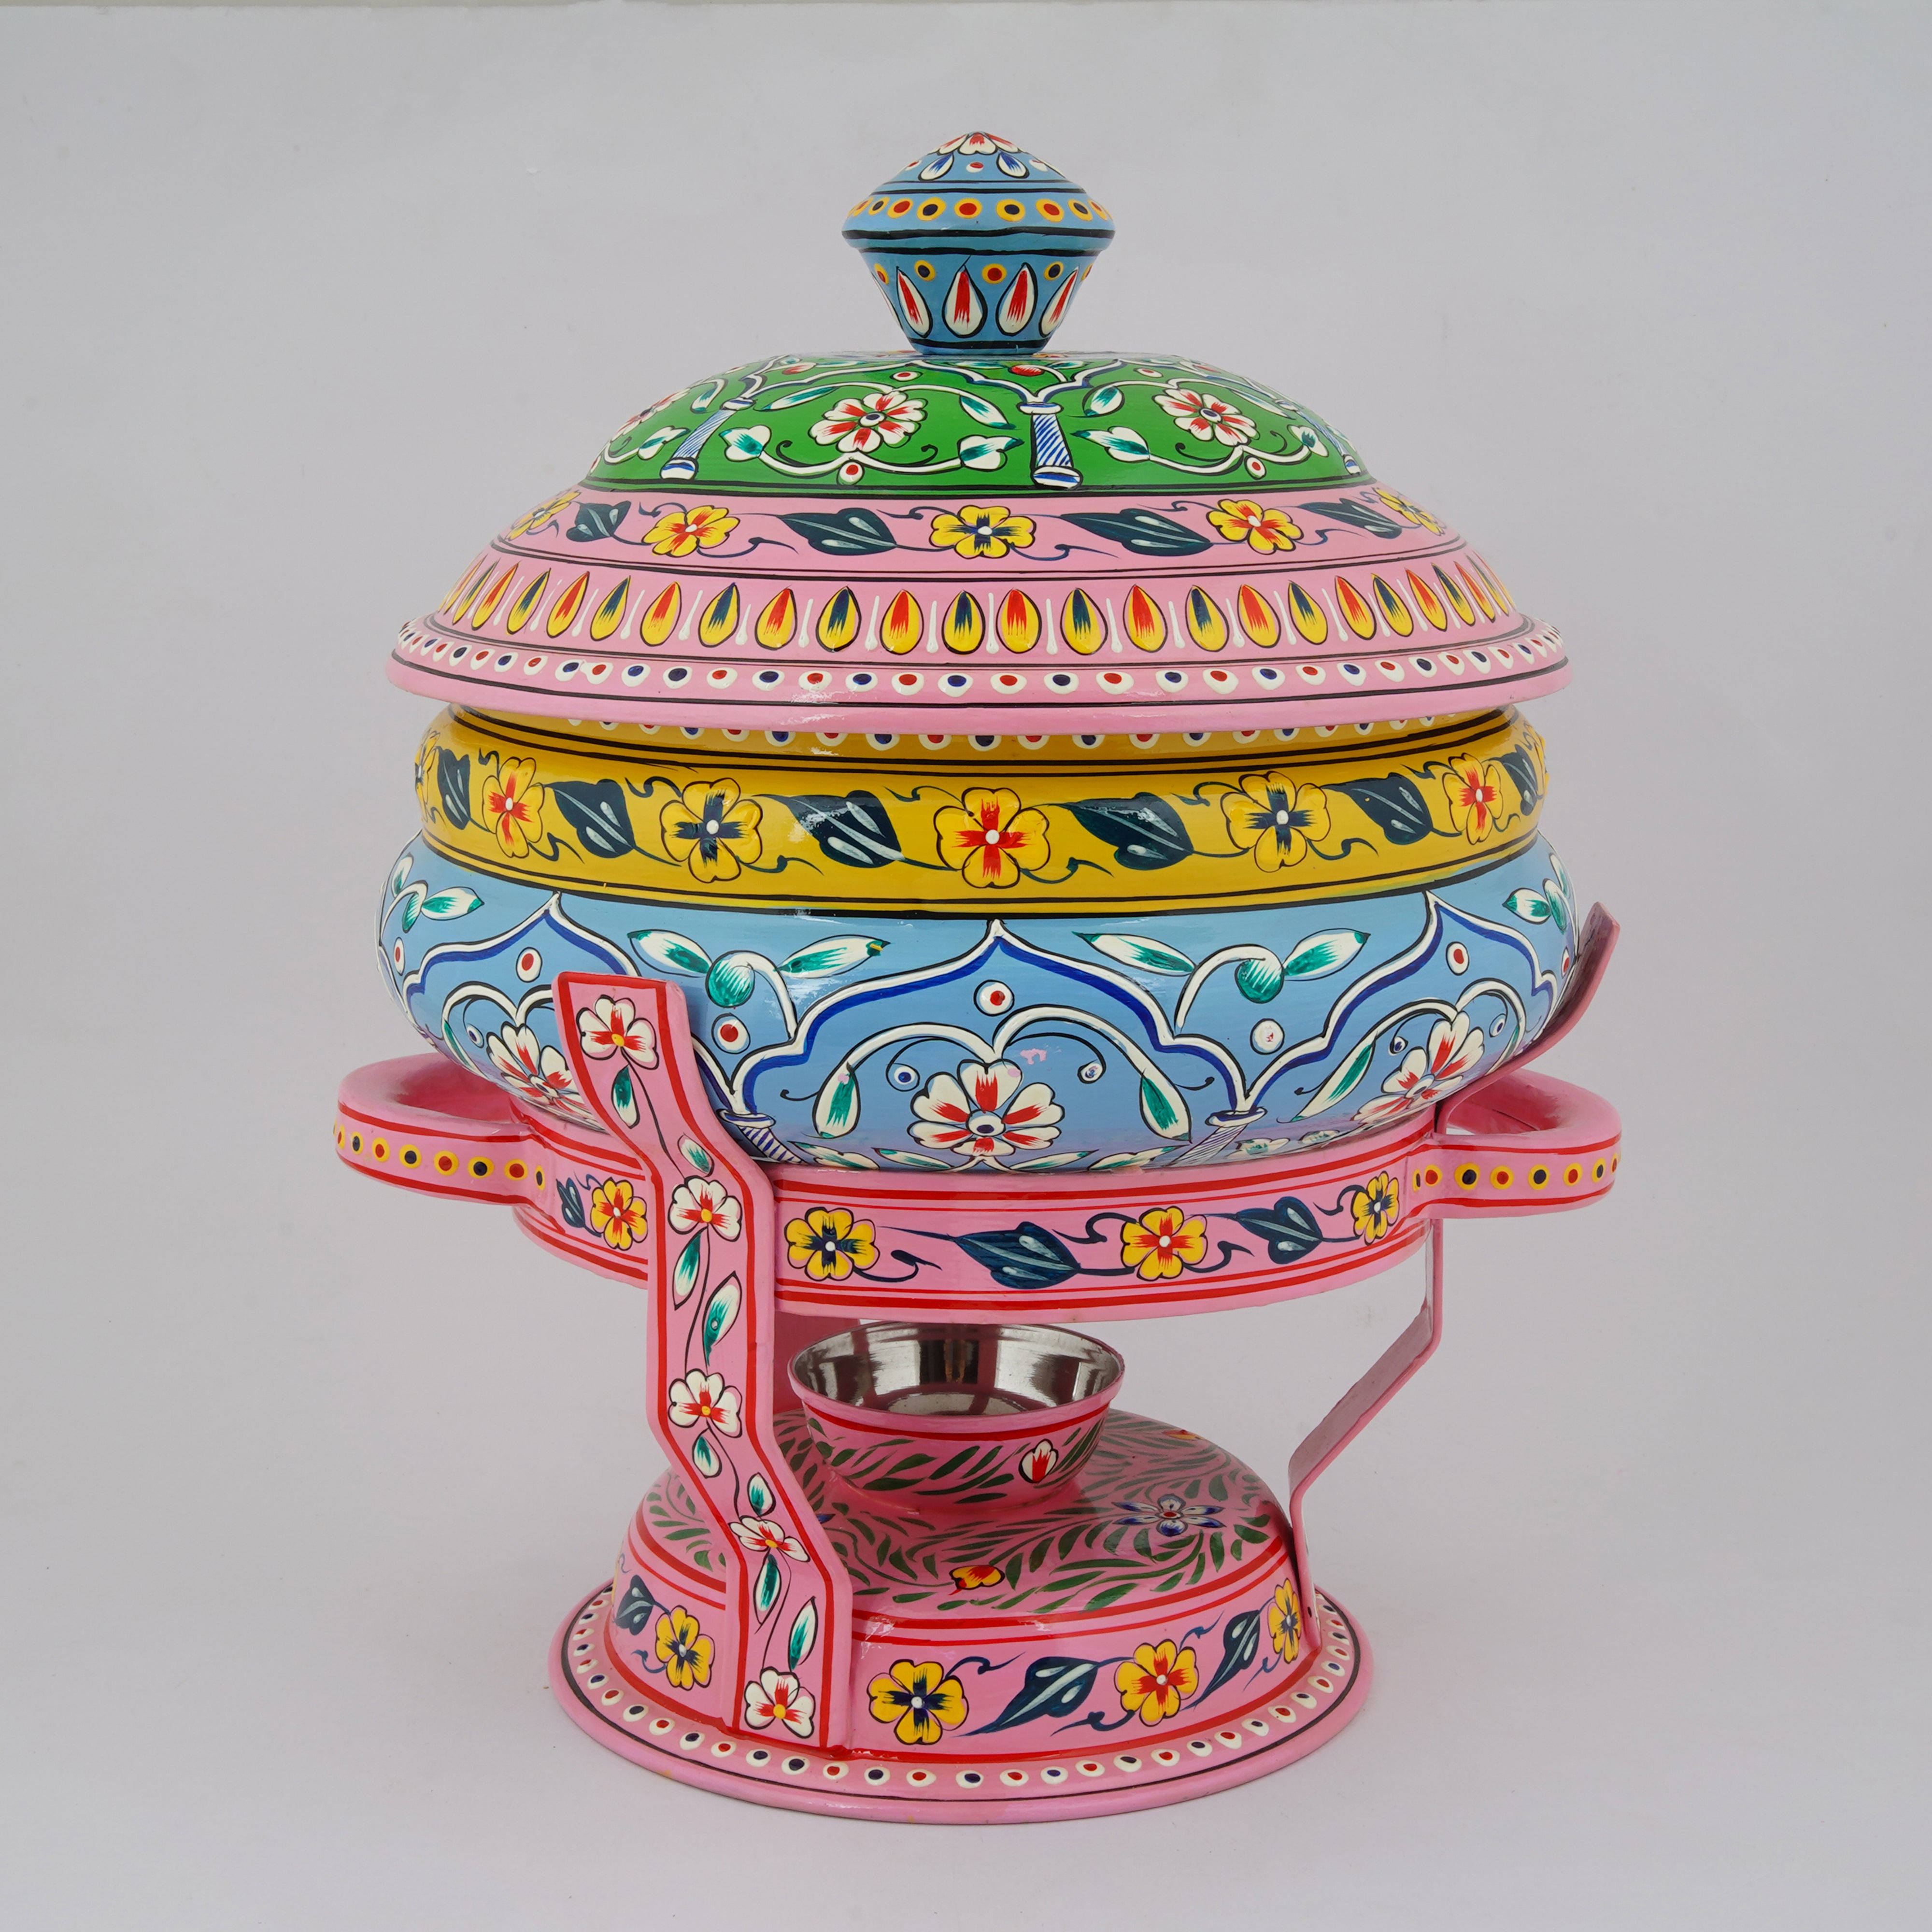 Hand Painted Chafing Dish - Multi Colored